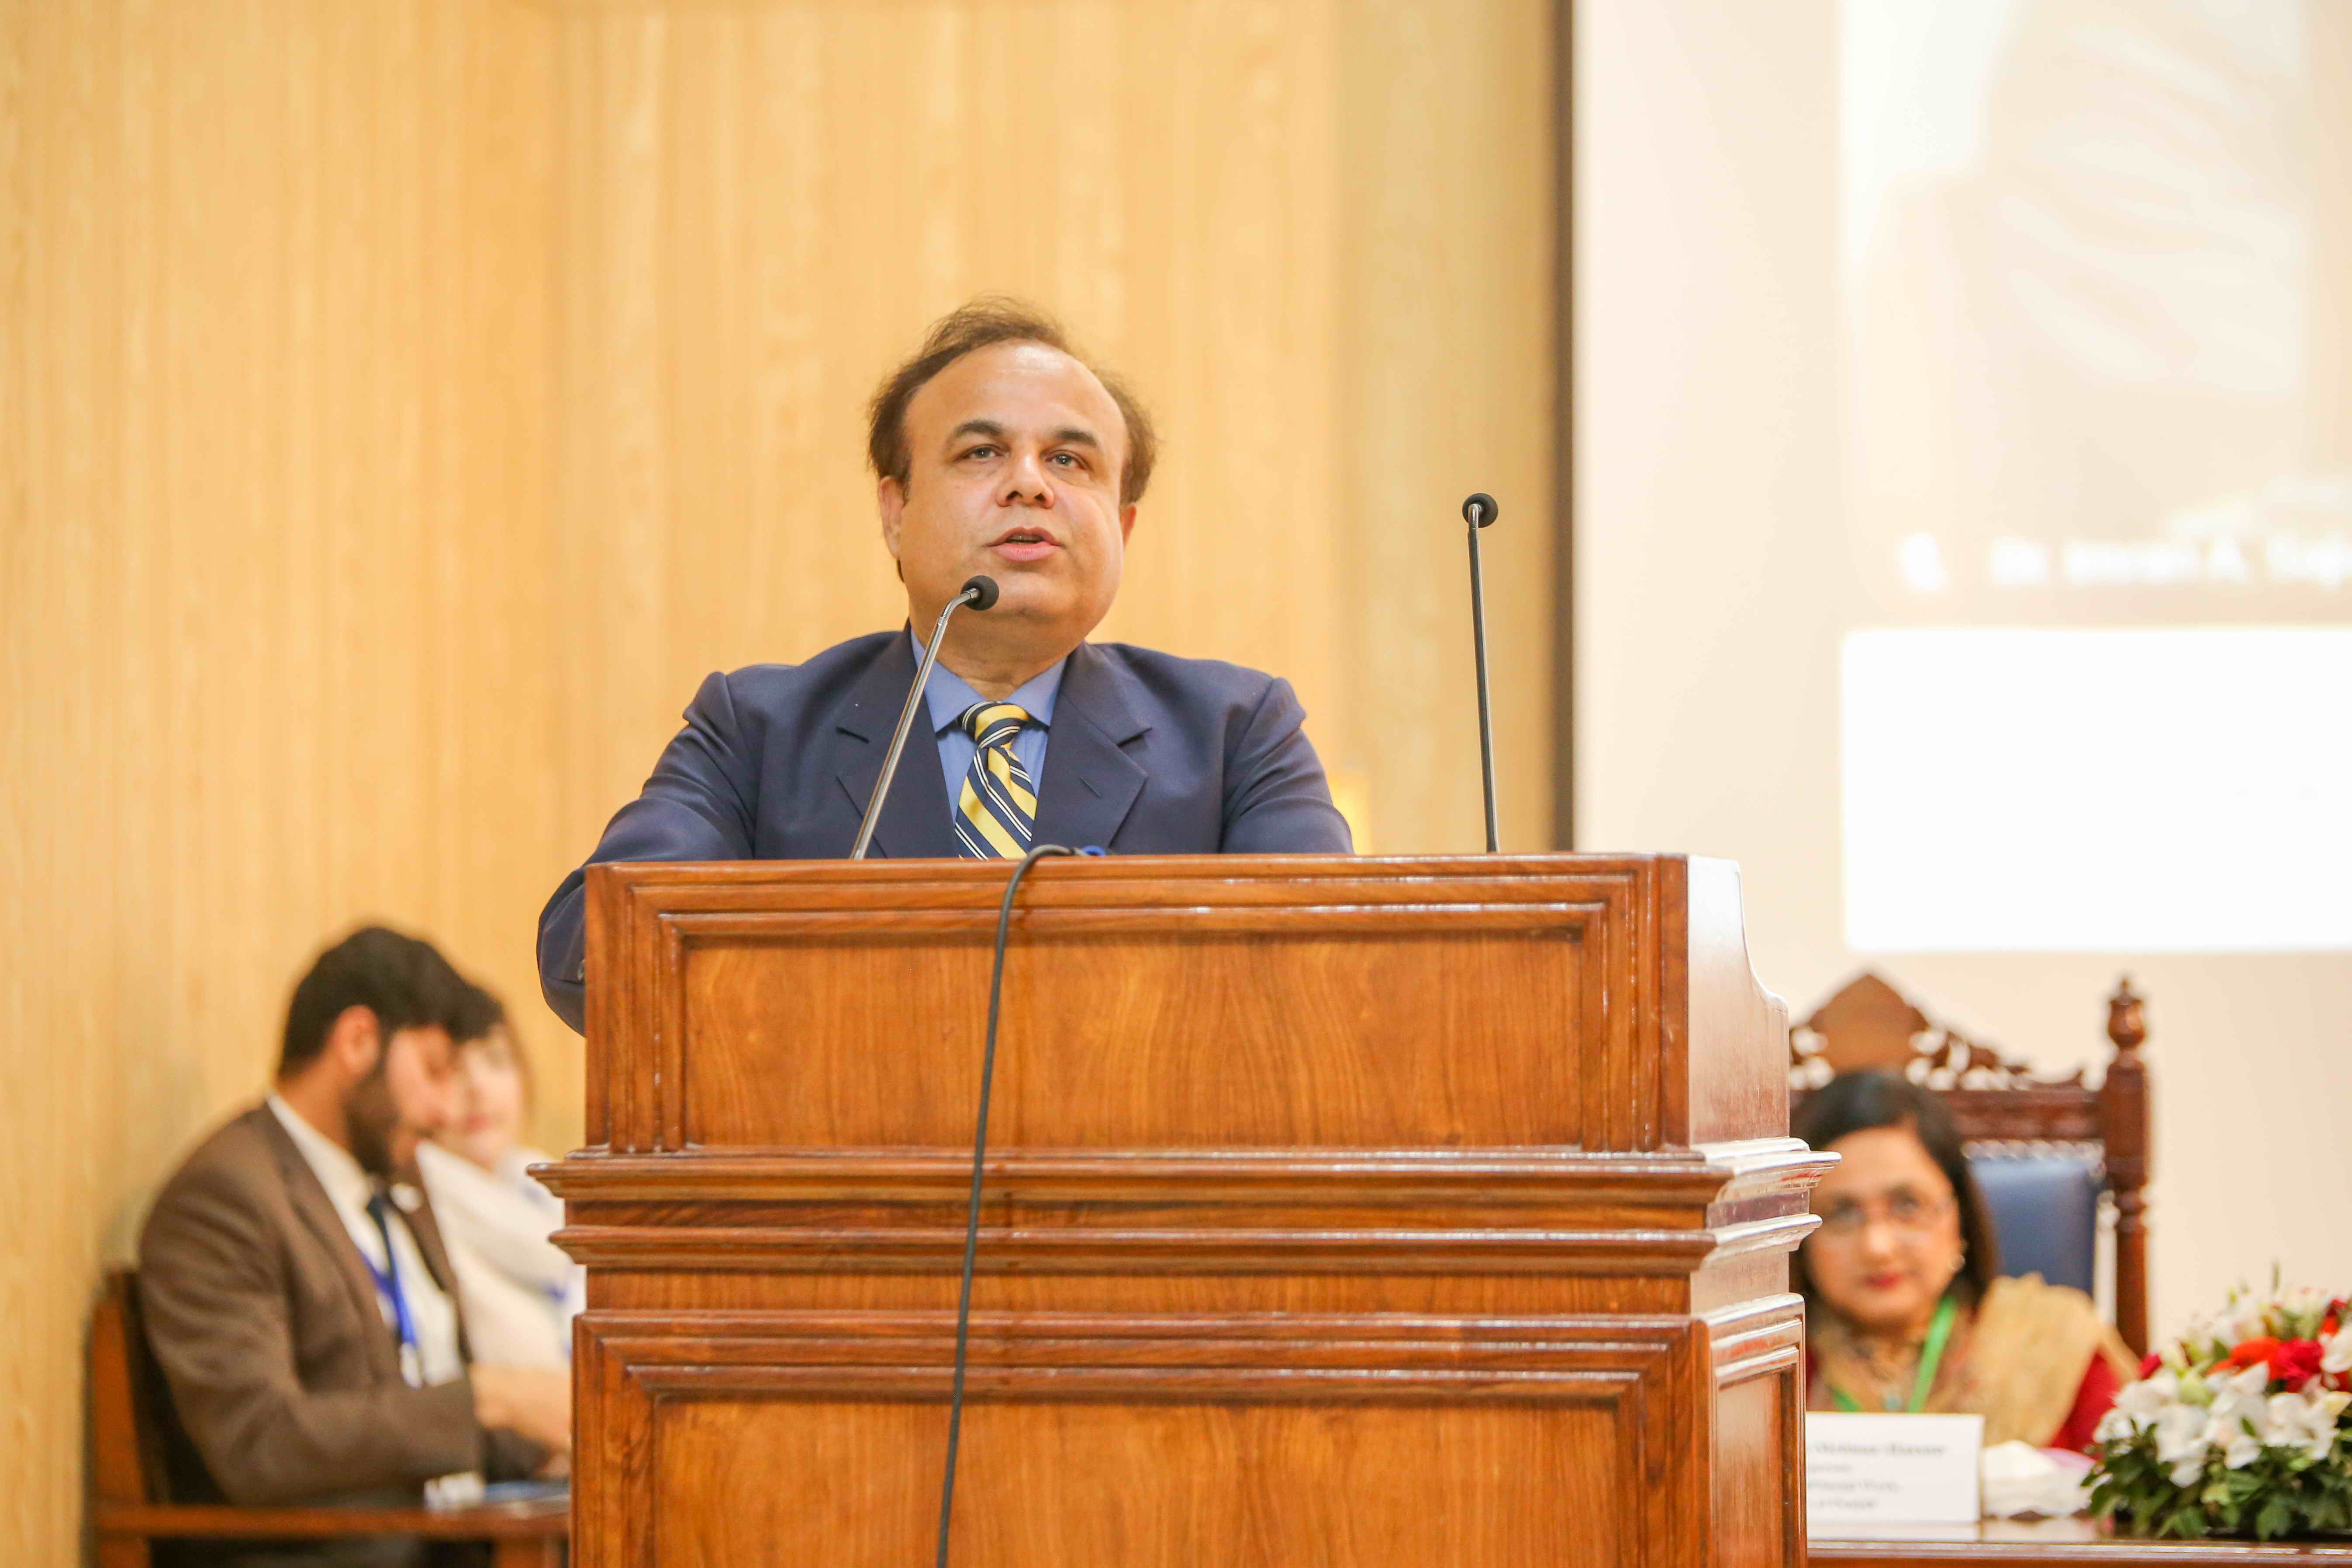 Dr. Shakeel Ahmed, Chairman, Department of Social Work, University of Peshawar addressing 1st NVCSW 2021